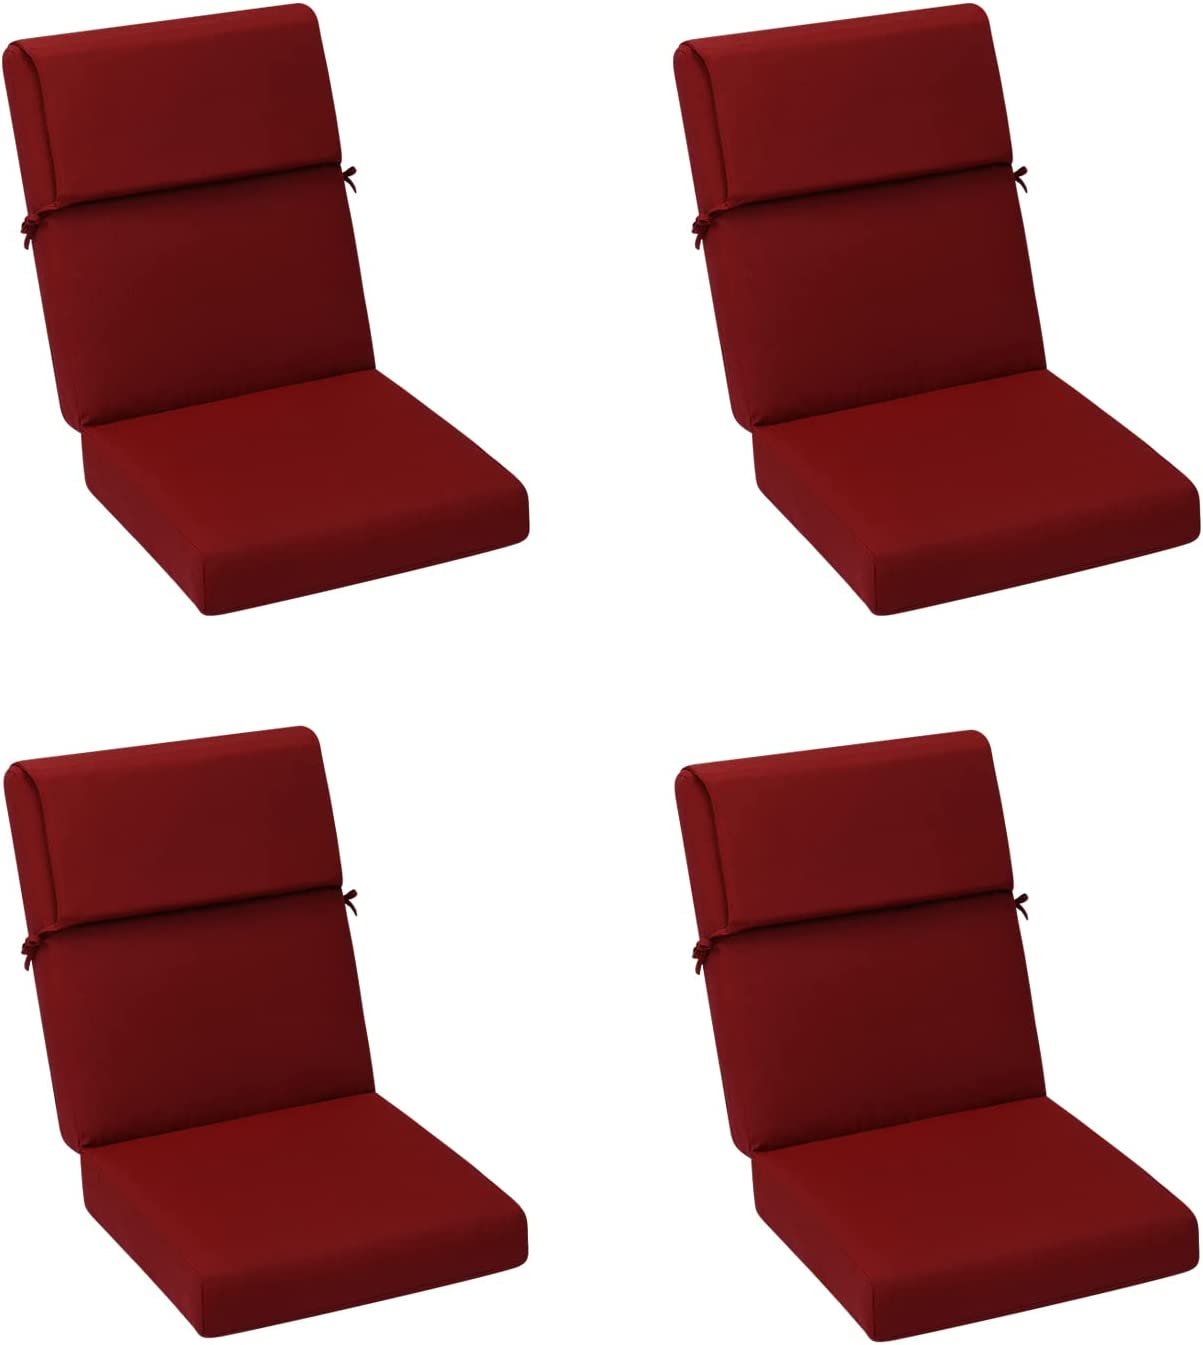 High Back Chair Cushions Set of 4, UV-Protected & Water-Resistant, 46x21x4 Inches CUSHION Aoodor Red  